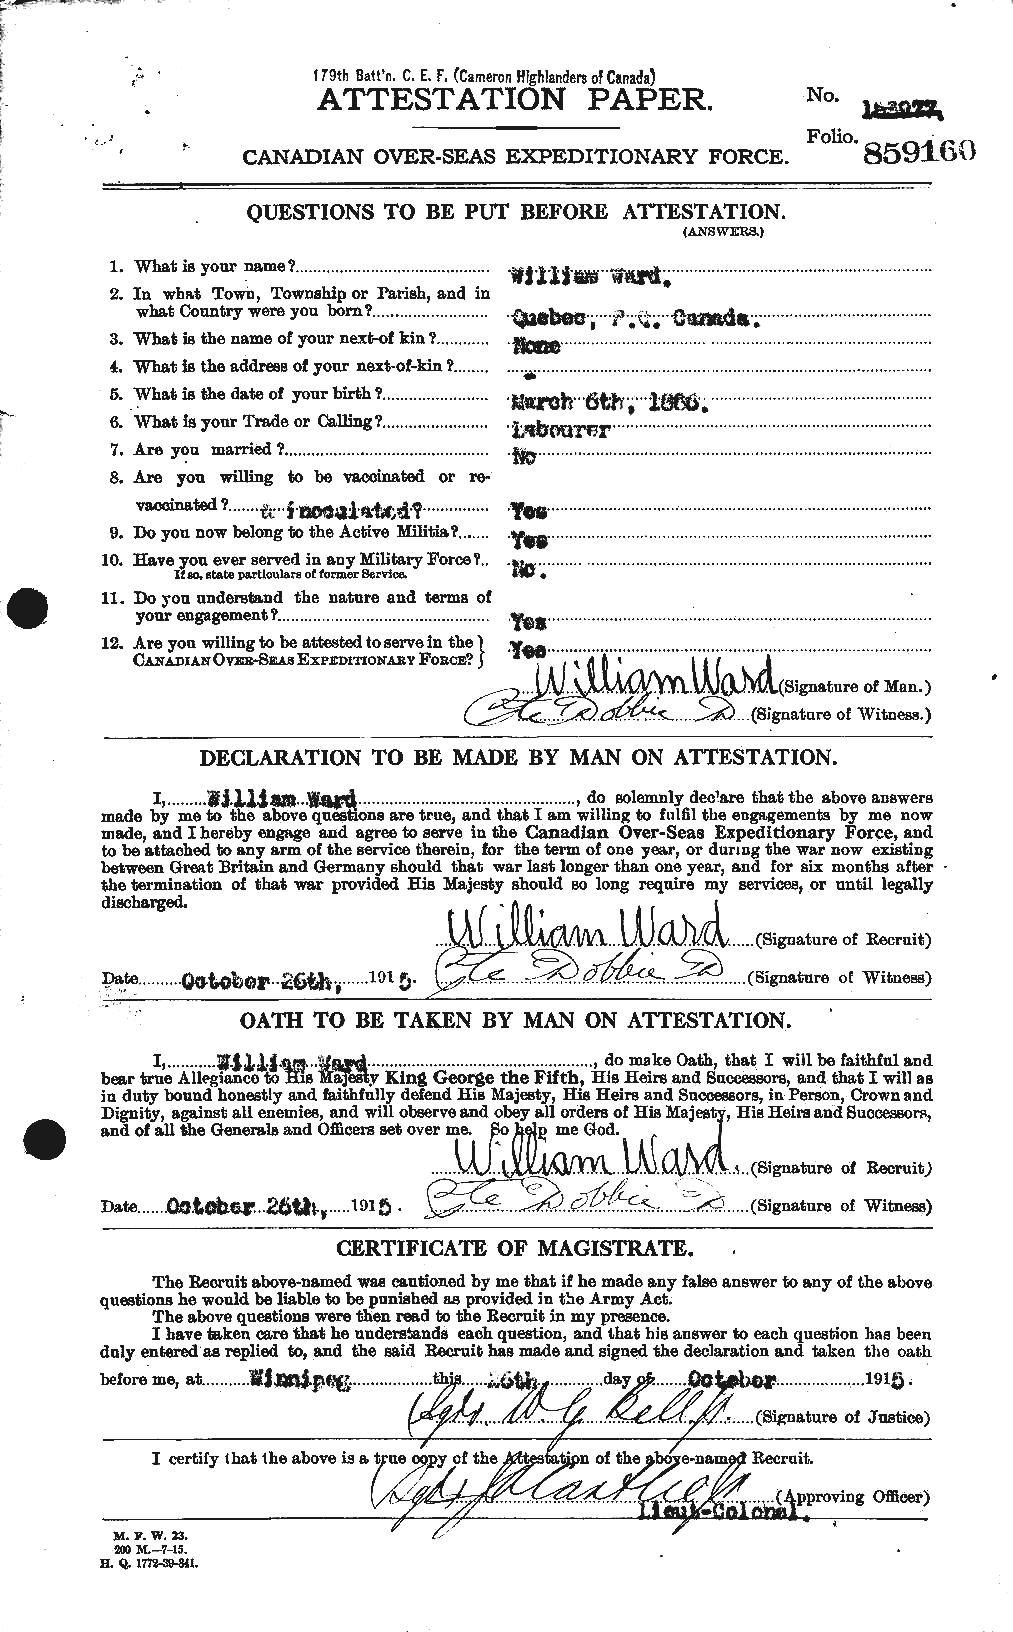 Personnel Records of the First World War - CEF 659791a